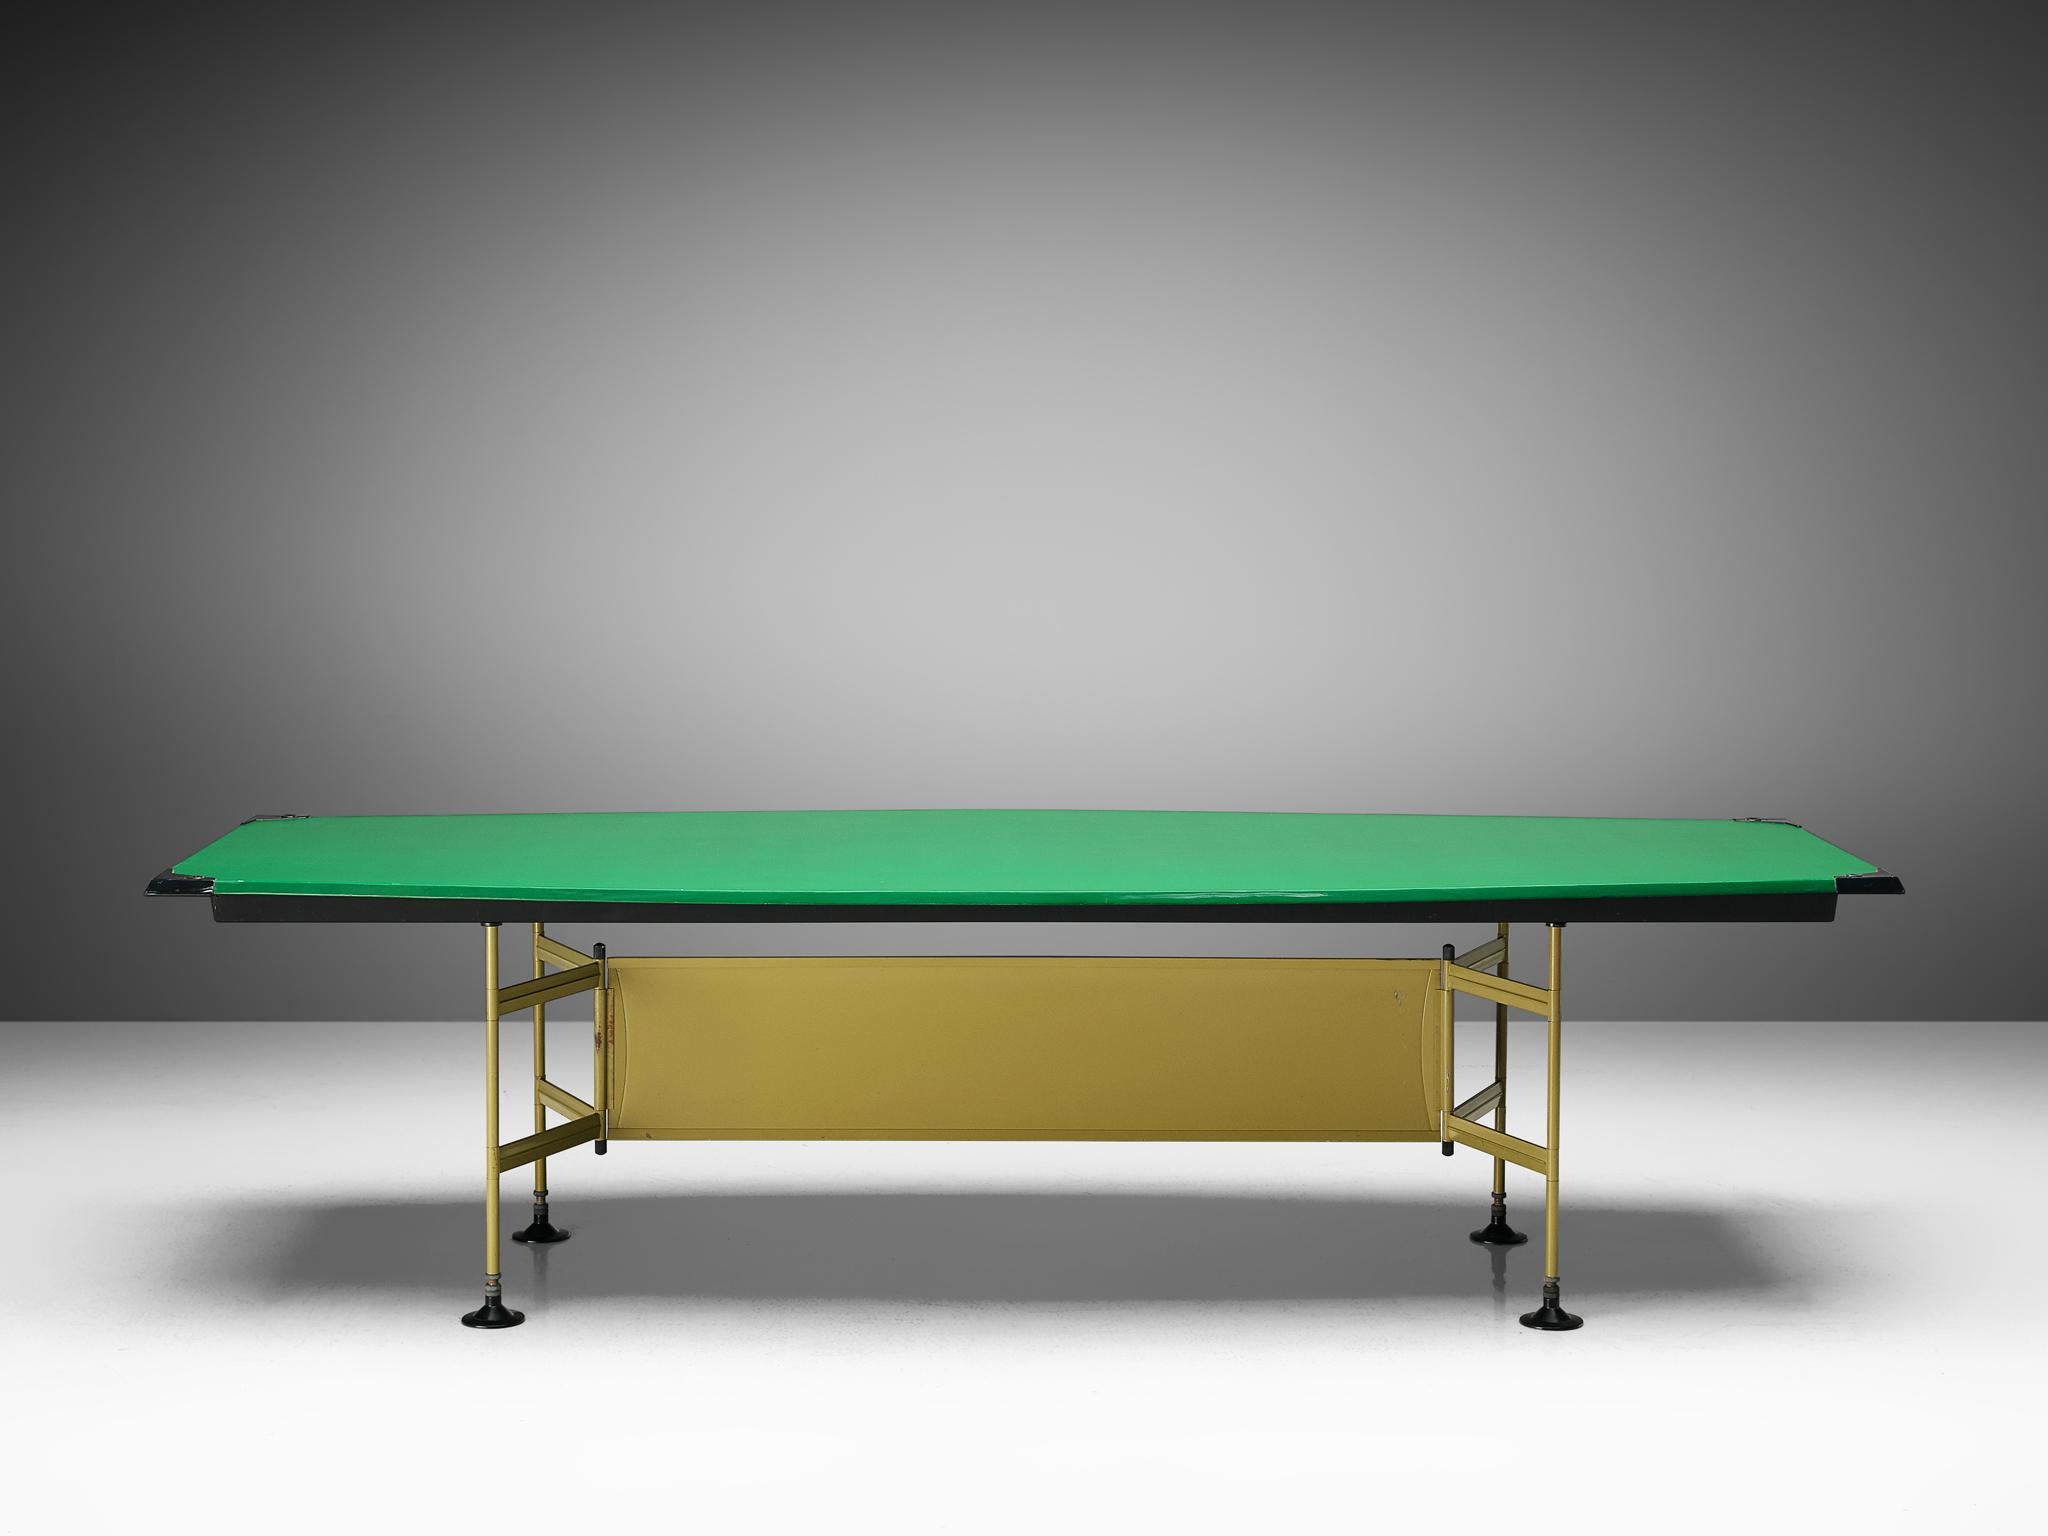 Studio BBPR, conference table, metal, plastic, leatherette and steel, Italy, 1960s

A large dining or work table designed by Studio BBPR. The table is part of the 'Spazio' series, a line the studio designed for the manufacturer Olivetti. The table